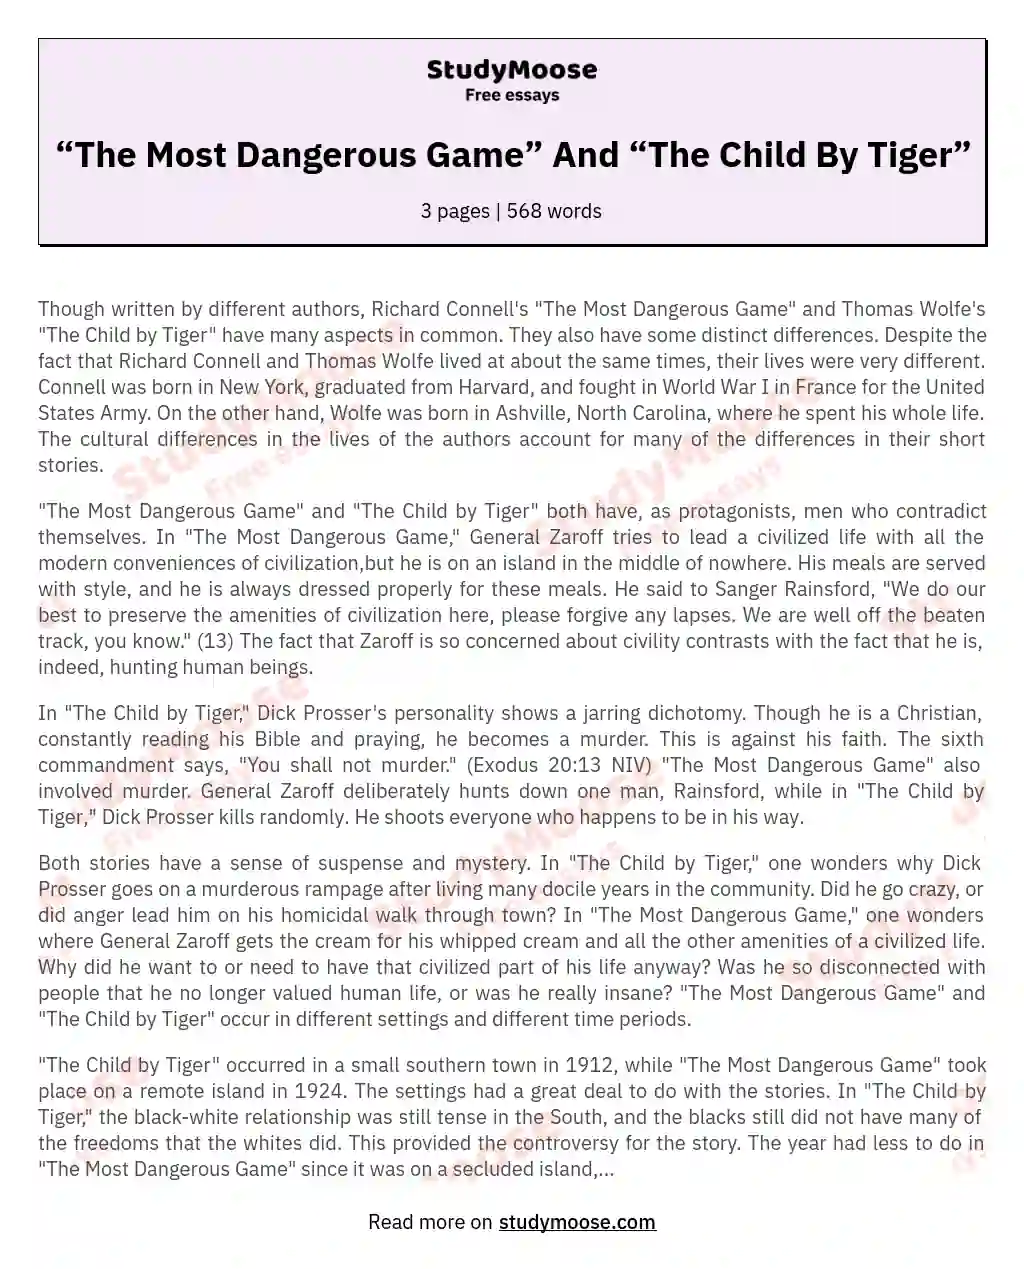 “The Most Dangerous Game” And “The Child By Tiger” essay